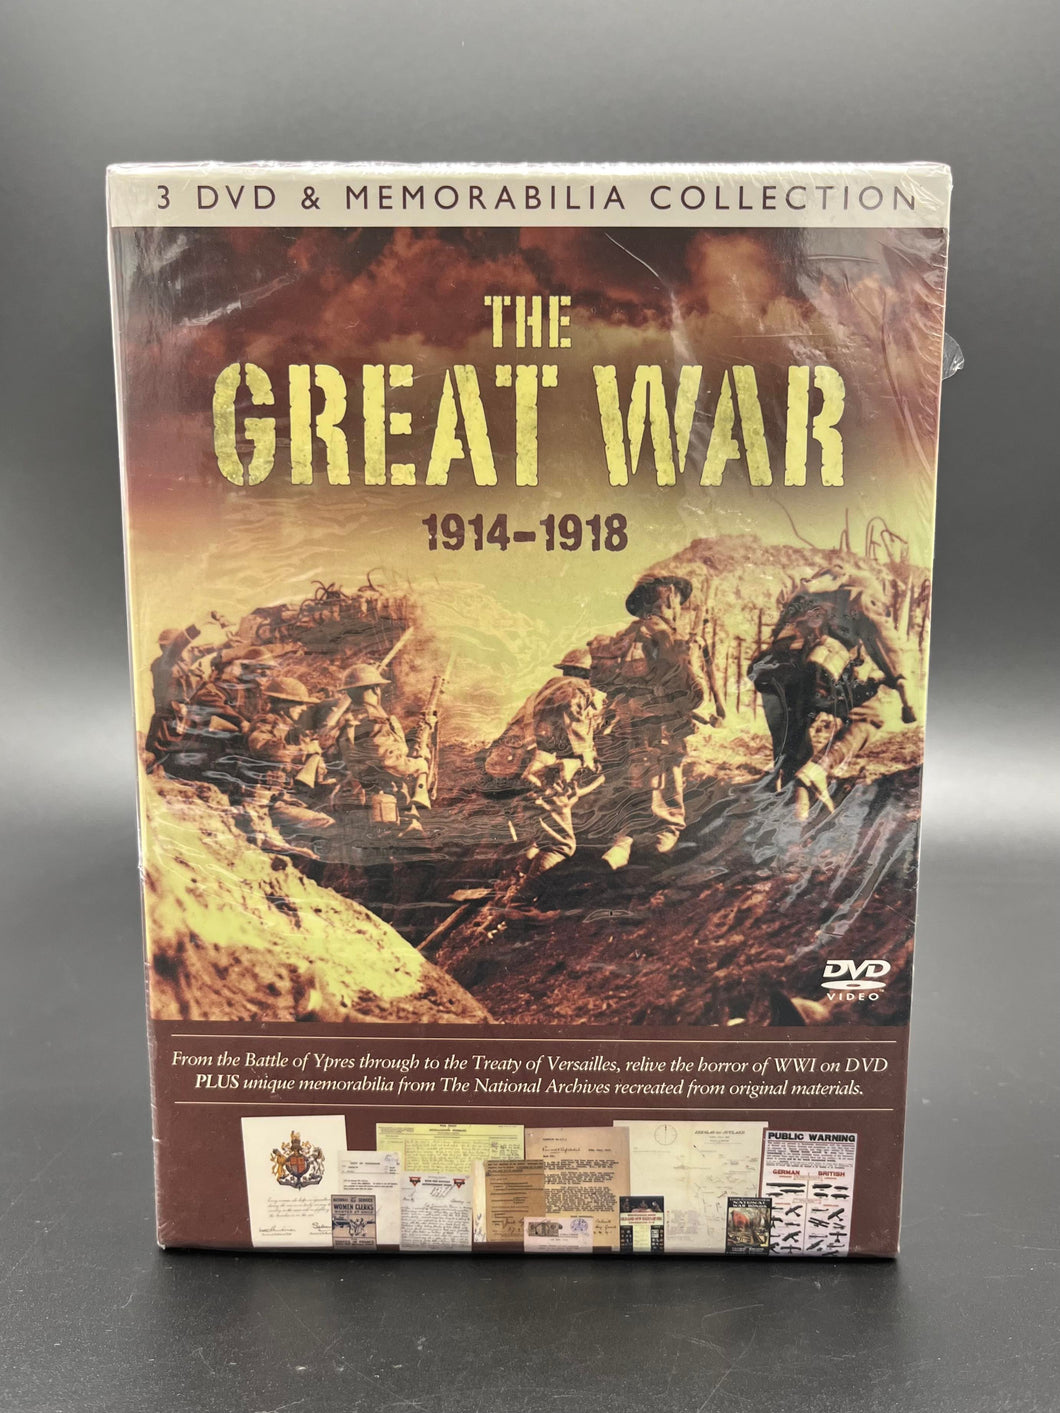 The Great War (1914-1918) - 3 DVD & Memorabilia Collection - Sealed